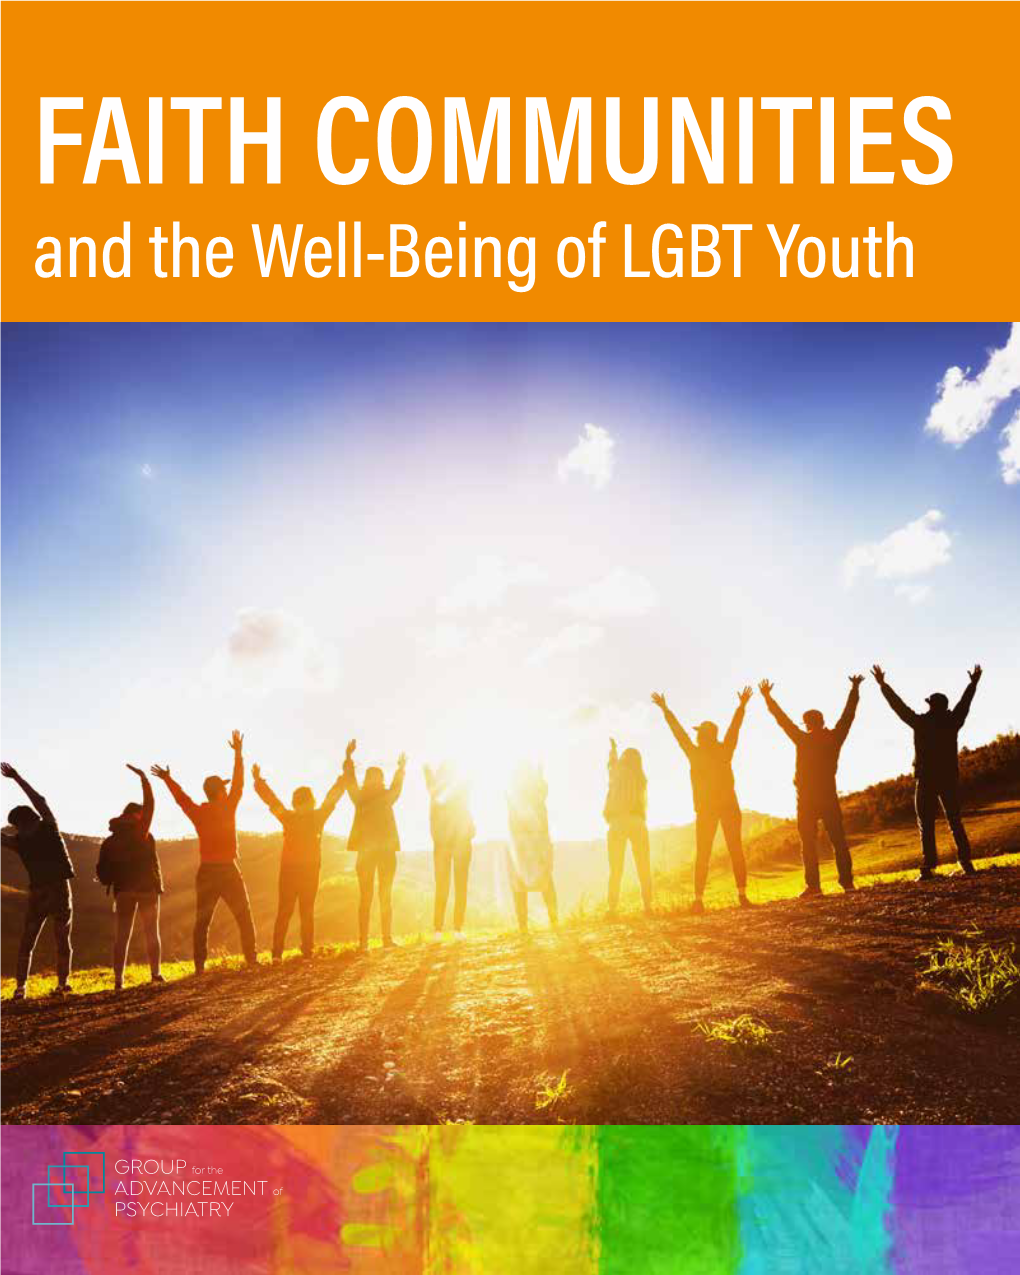 FAITH COMMUNITIES and the Well-Being of LGBT Youth